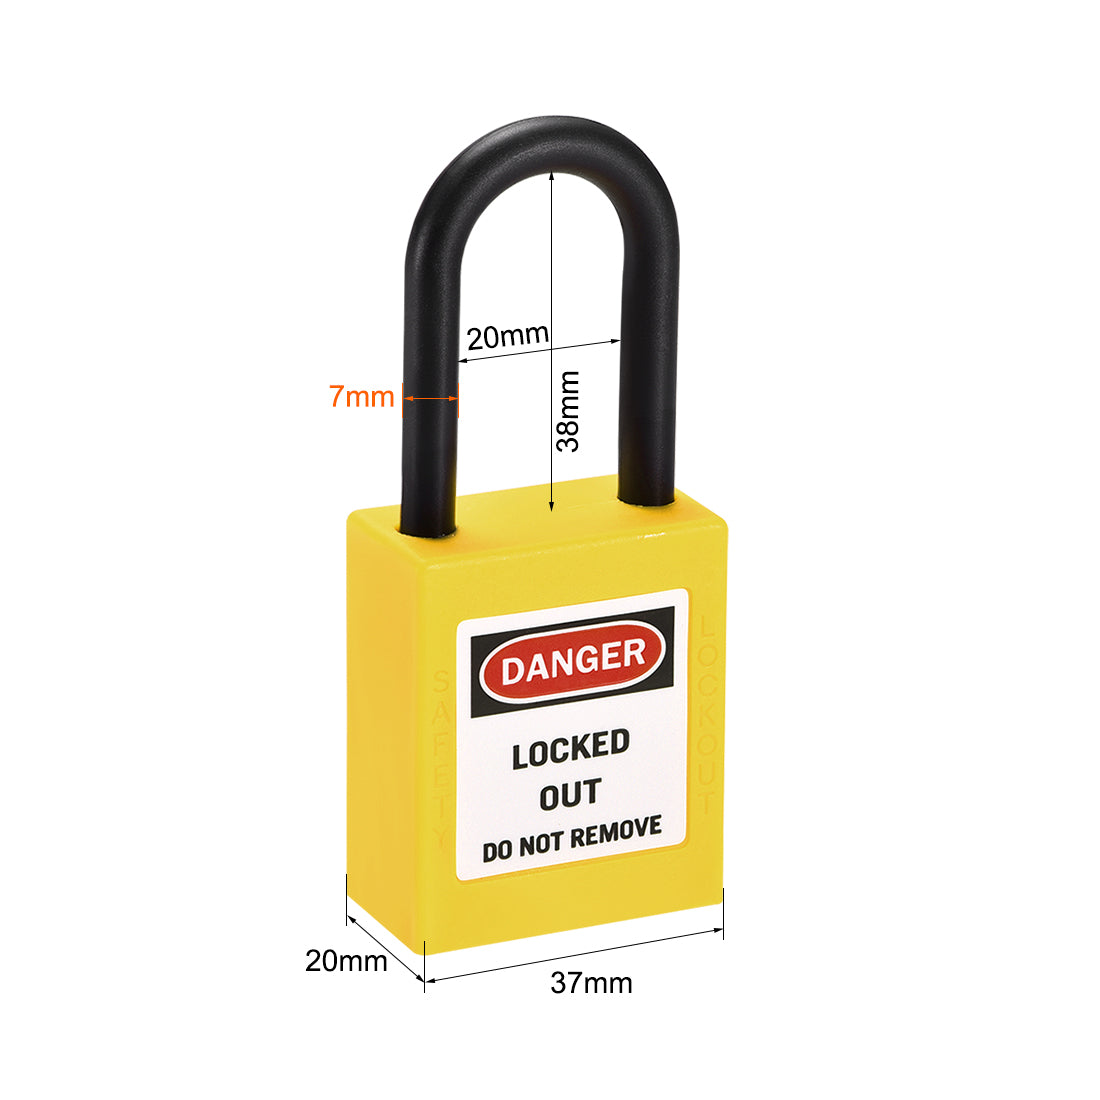 uxcell Uxcell Lockout Tagout Safety Padlock 38mm Nylon Shackle Keyed Alike Yellow 2Pcs